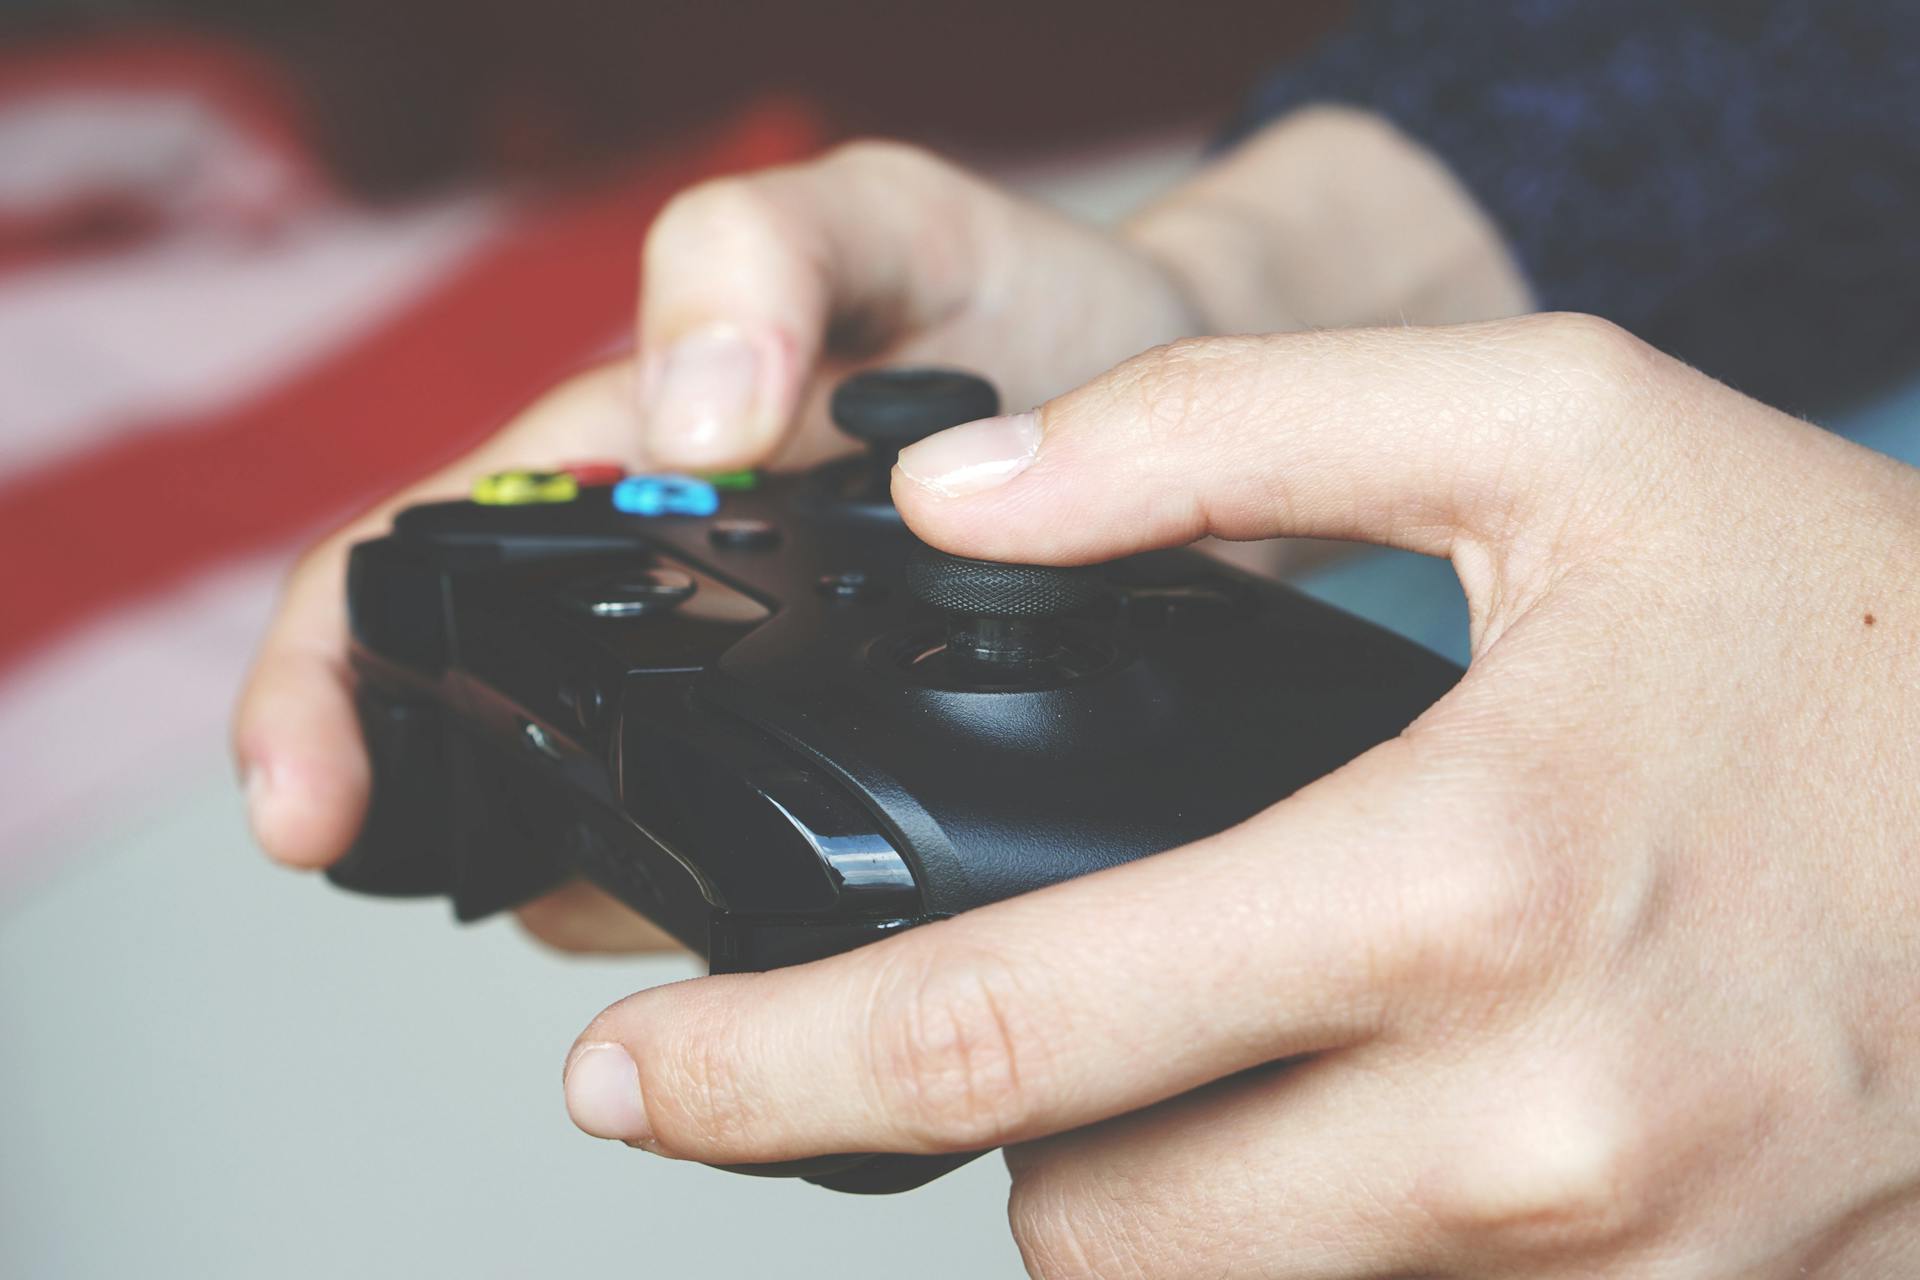 A person holding a game controller | Source: Pexels